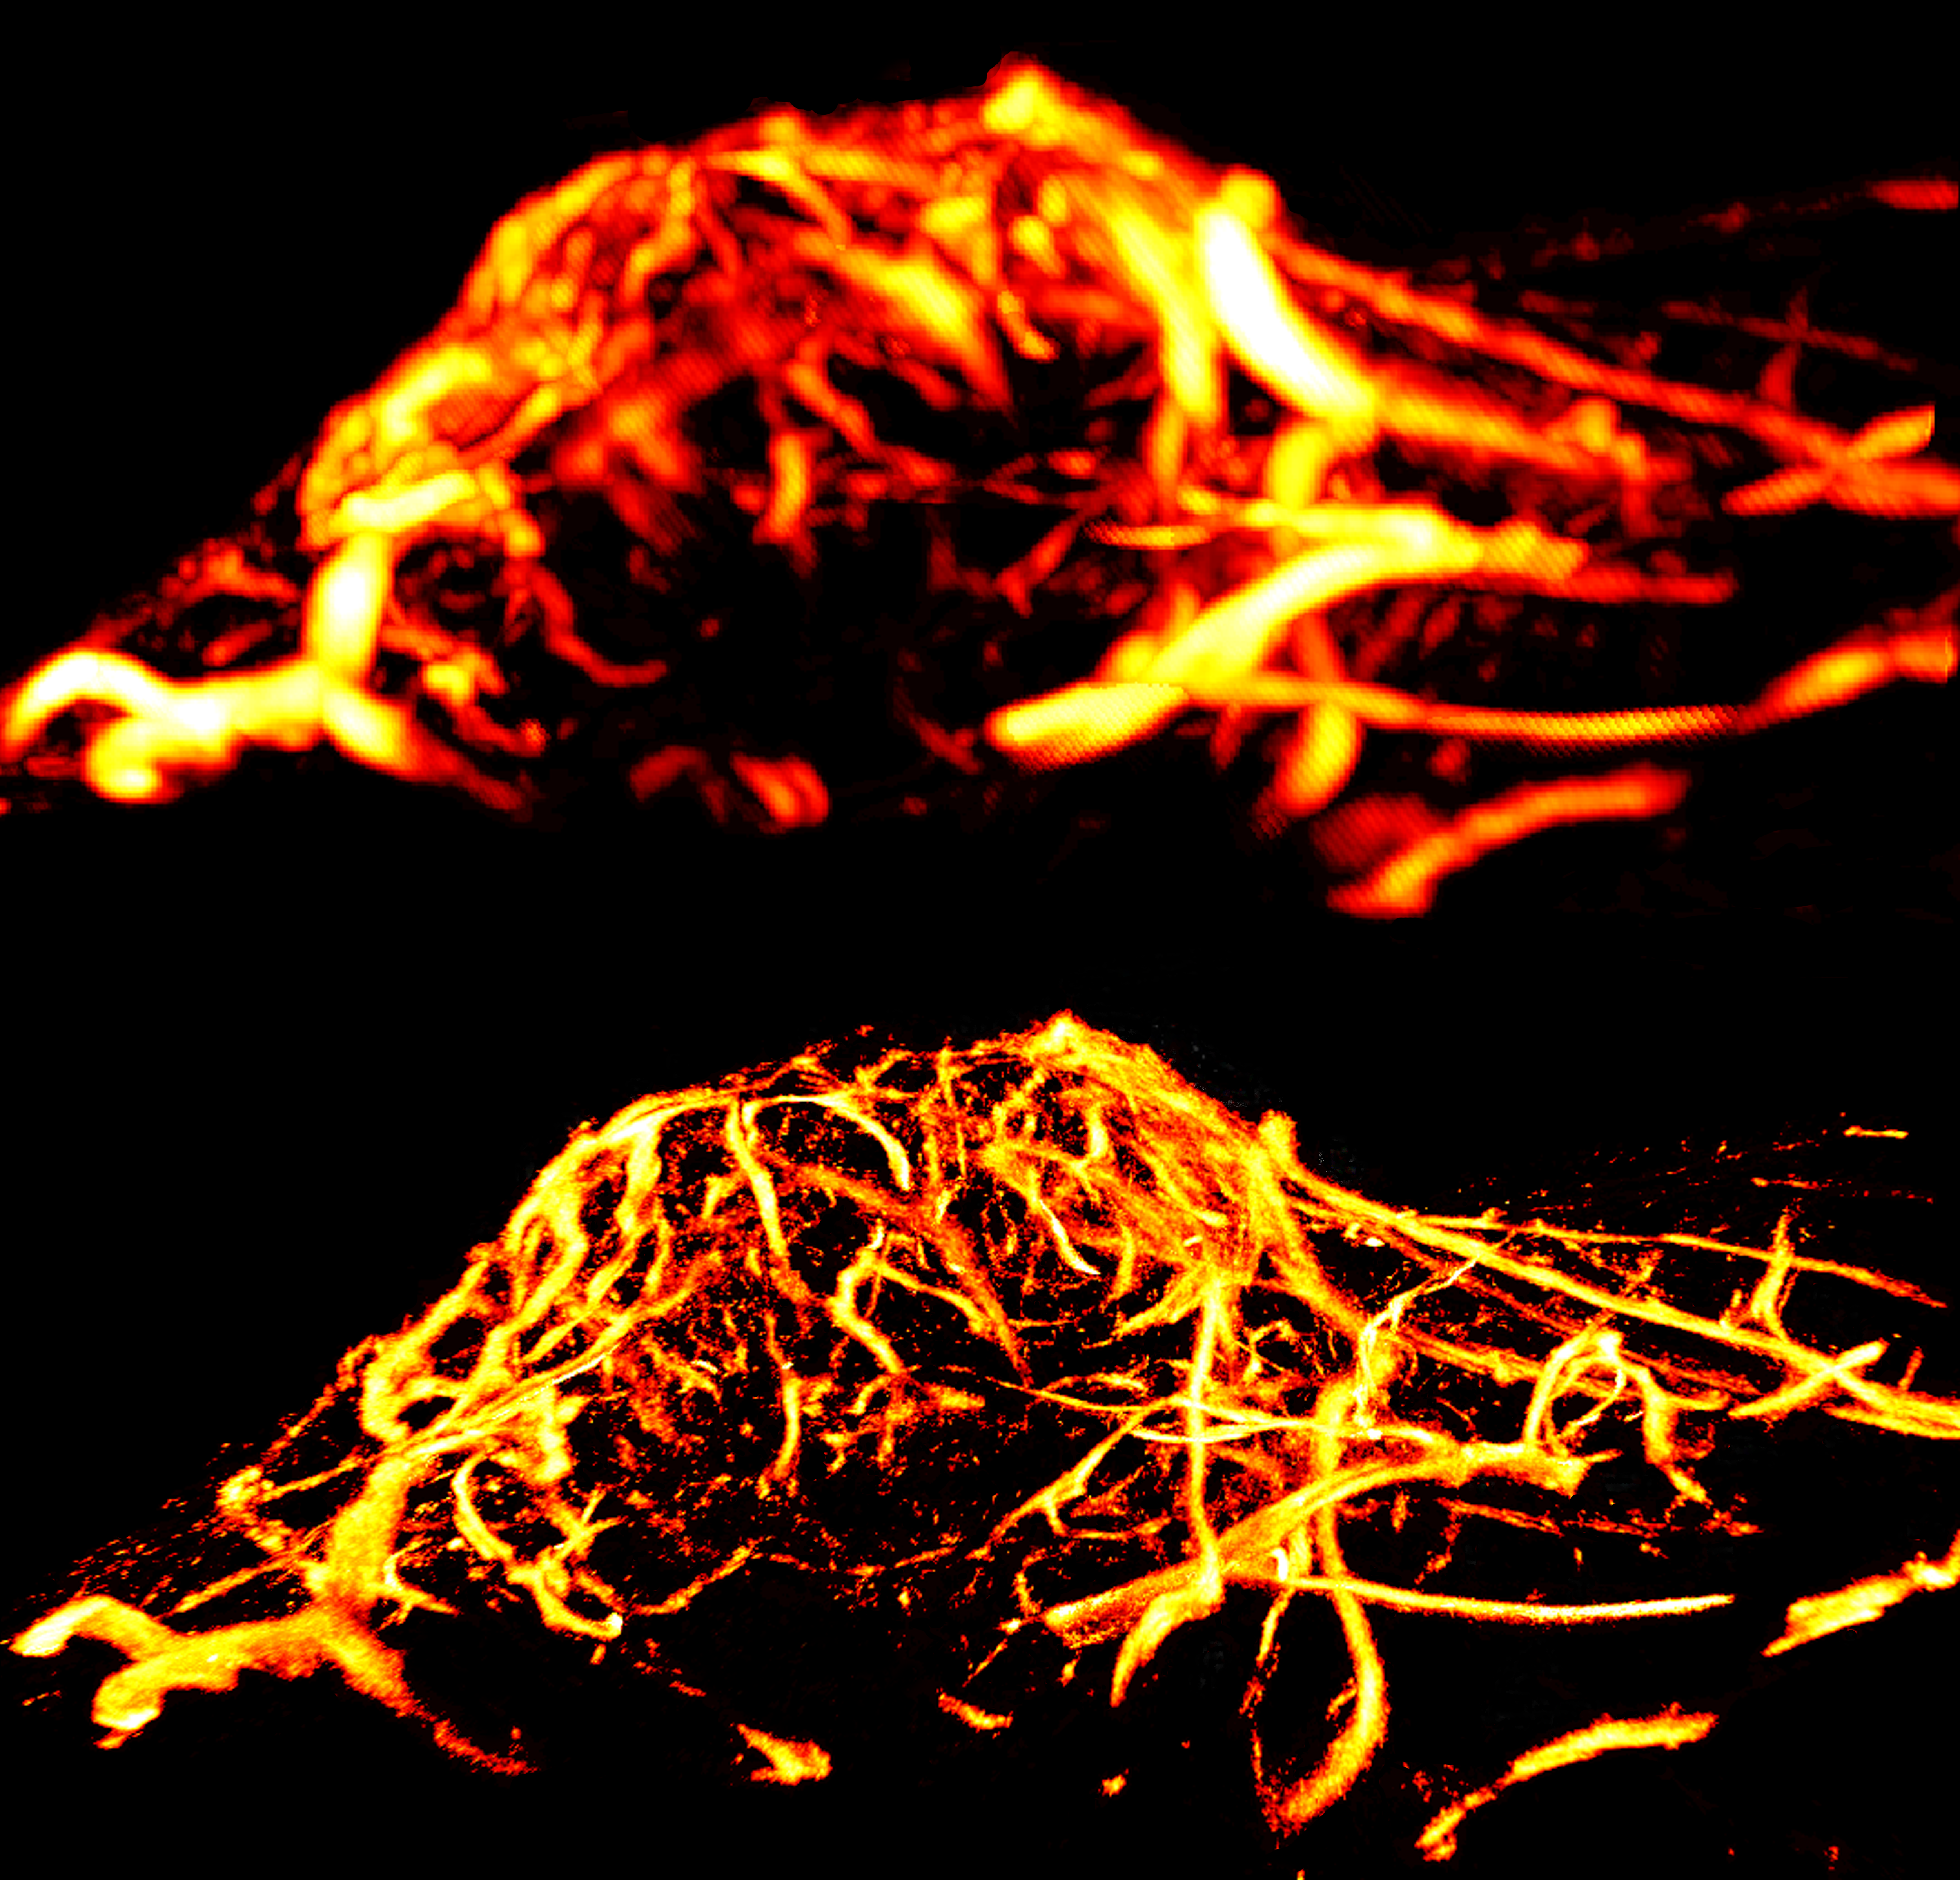 Contrast between two ultrasound imaging techniques used to image the microvasculature of a mouse's brain. The image generated using ultrasound localization microscopy is much finer and clearer than the image generated using power doppler imaging.